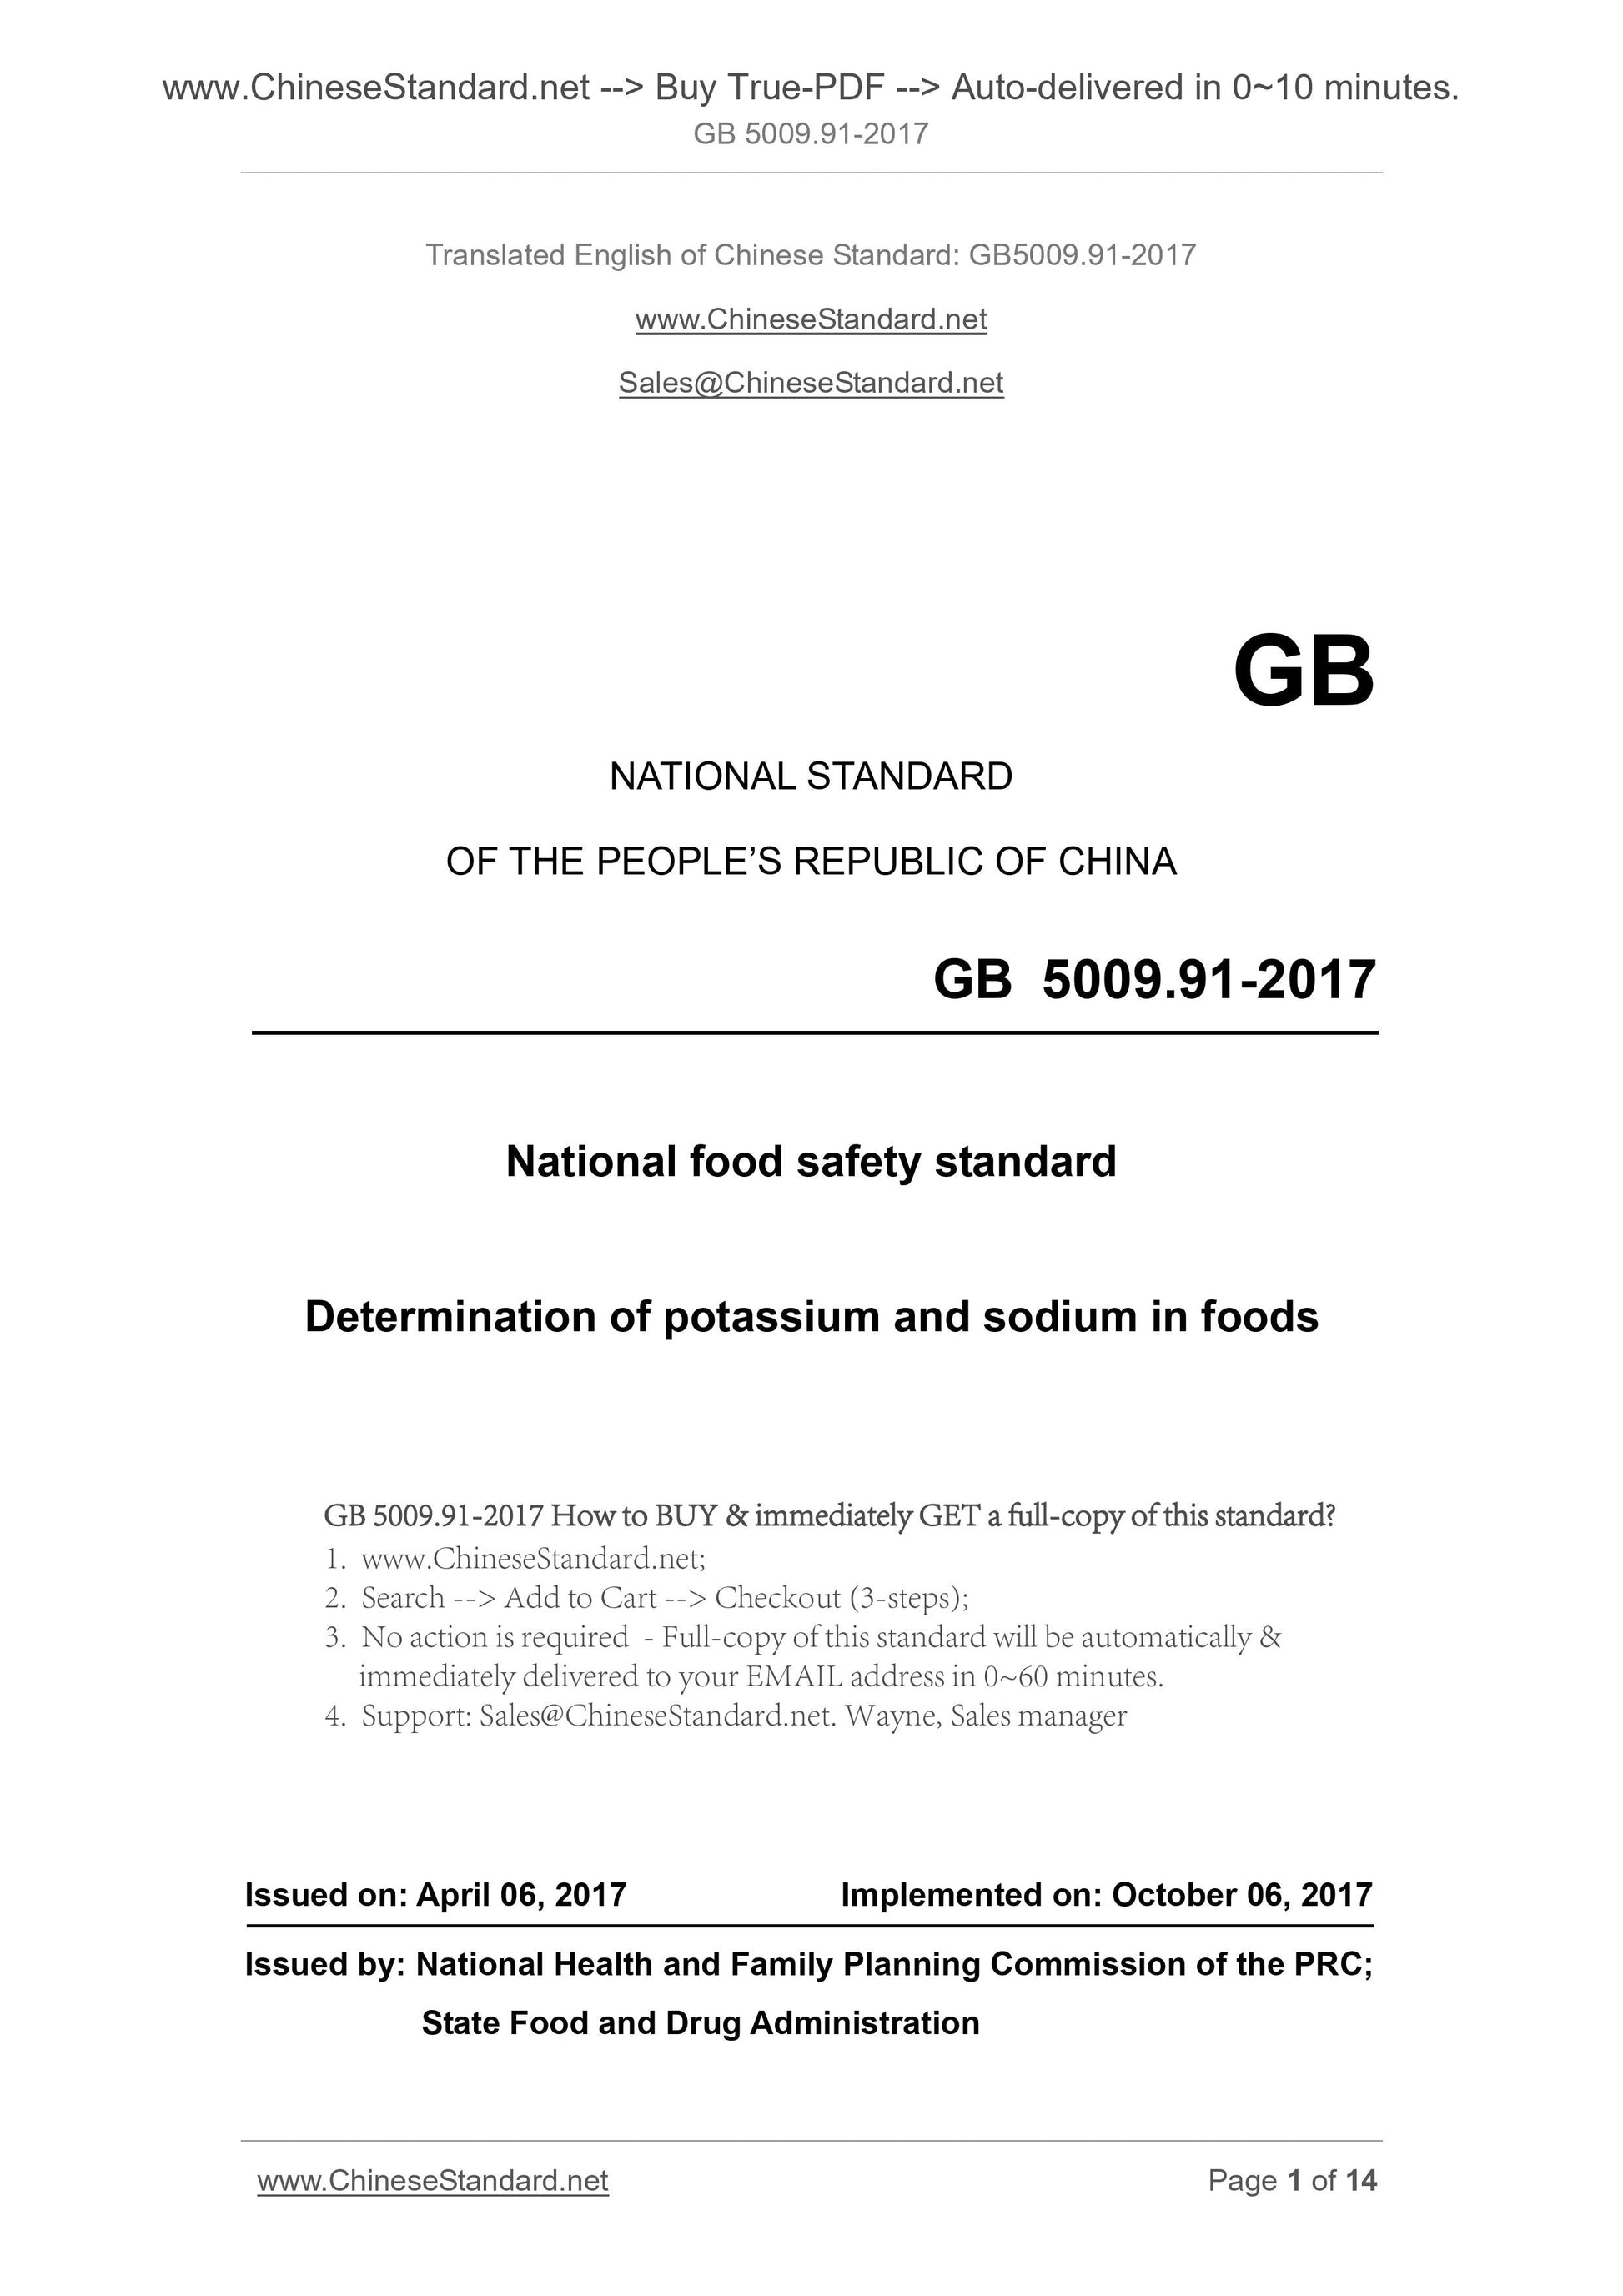 GB 5009.91-2017 Page 1